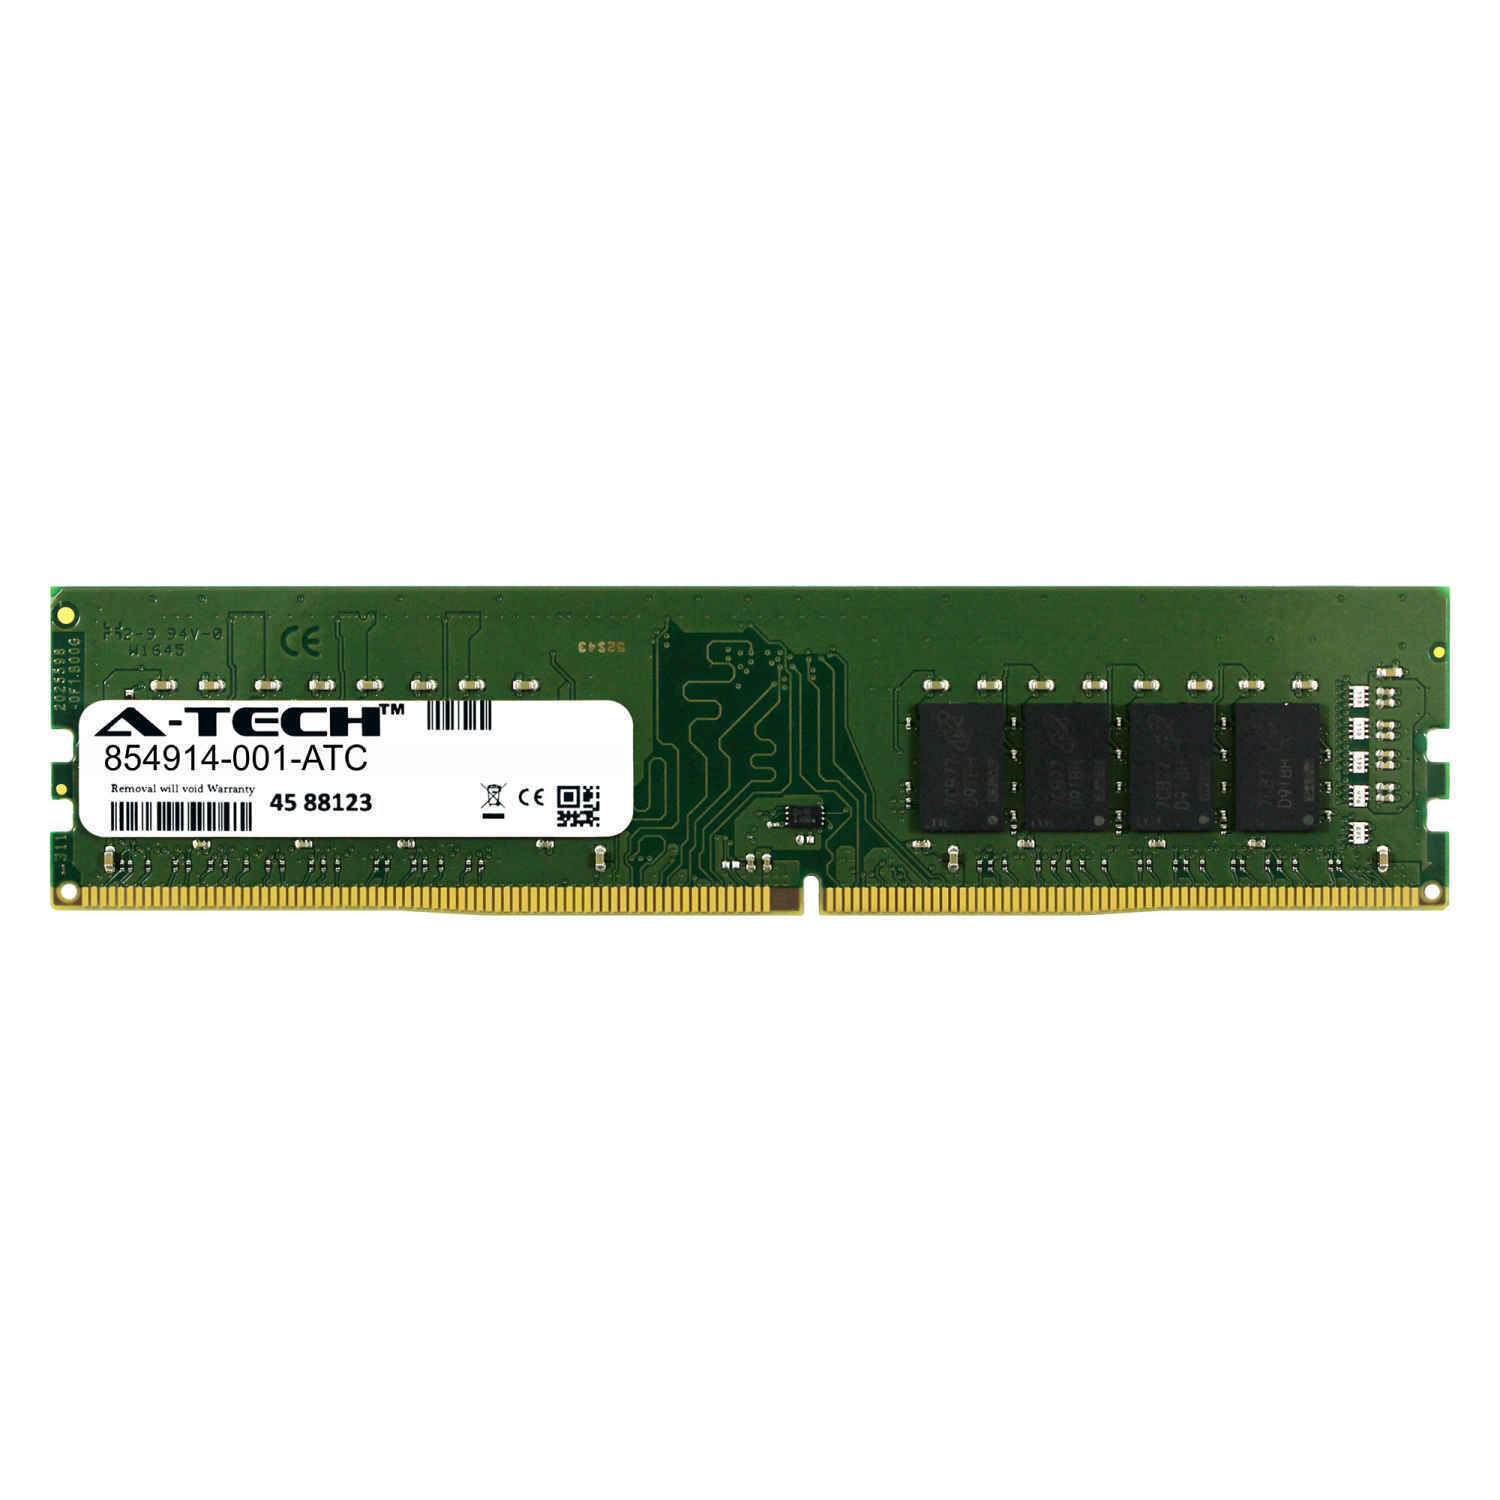 16GB DDR4 2400MHz PC4-19200 DIMM (HP 854914-001 Equivalent) Memory RAM